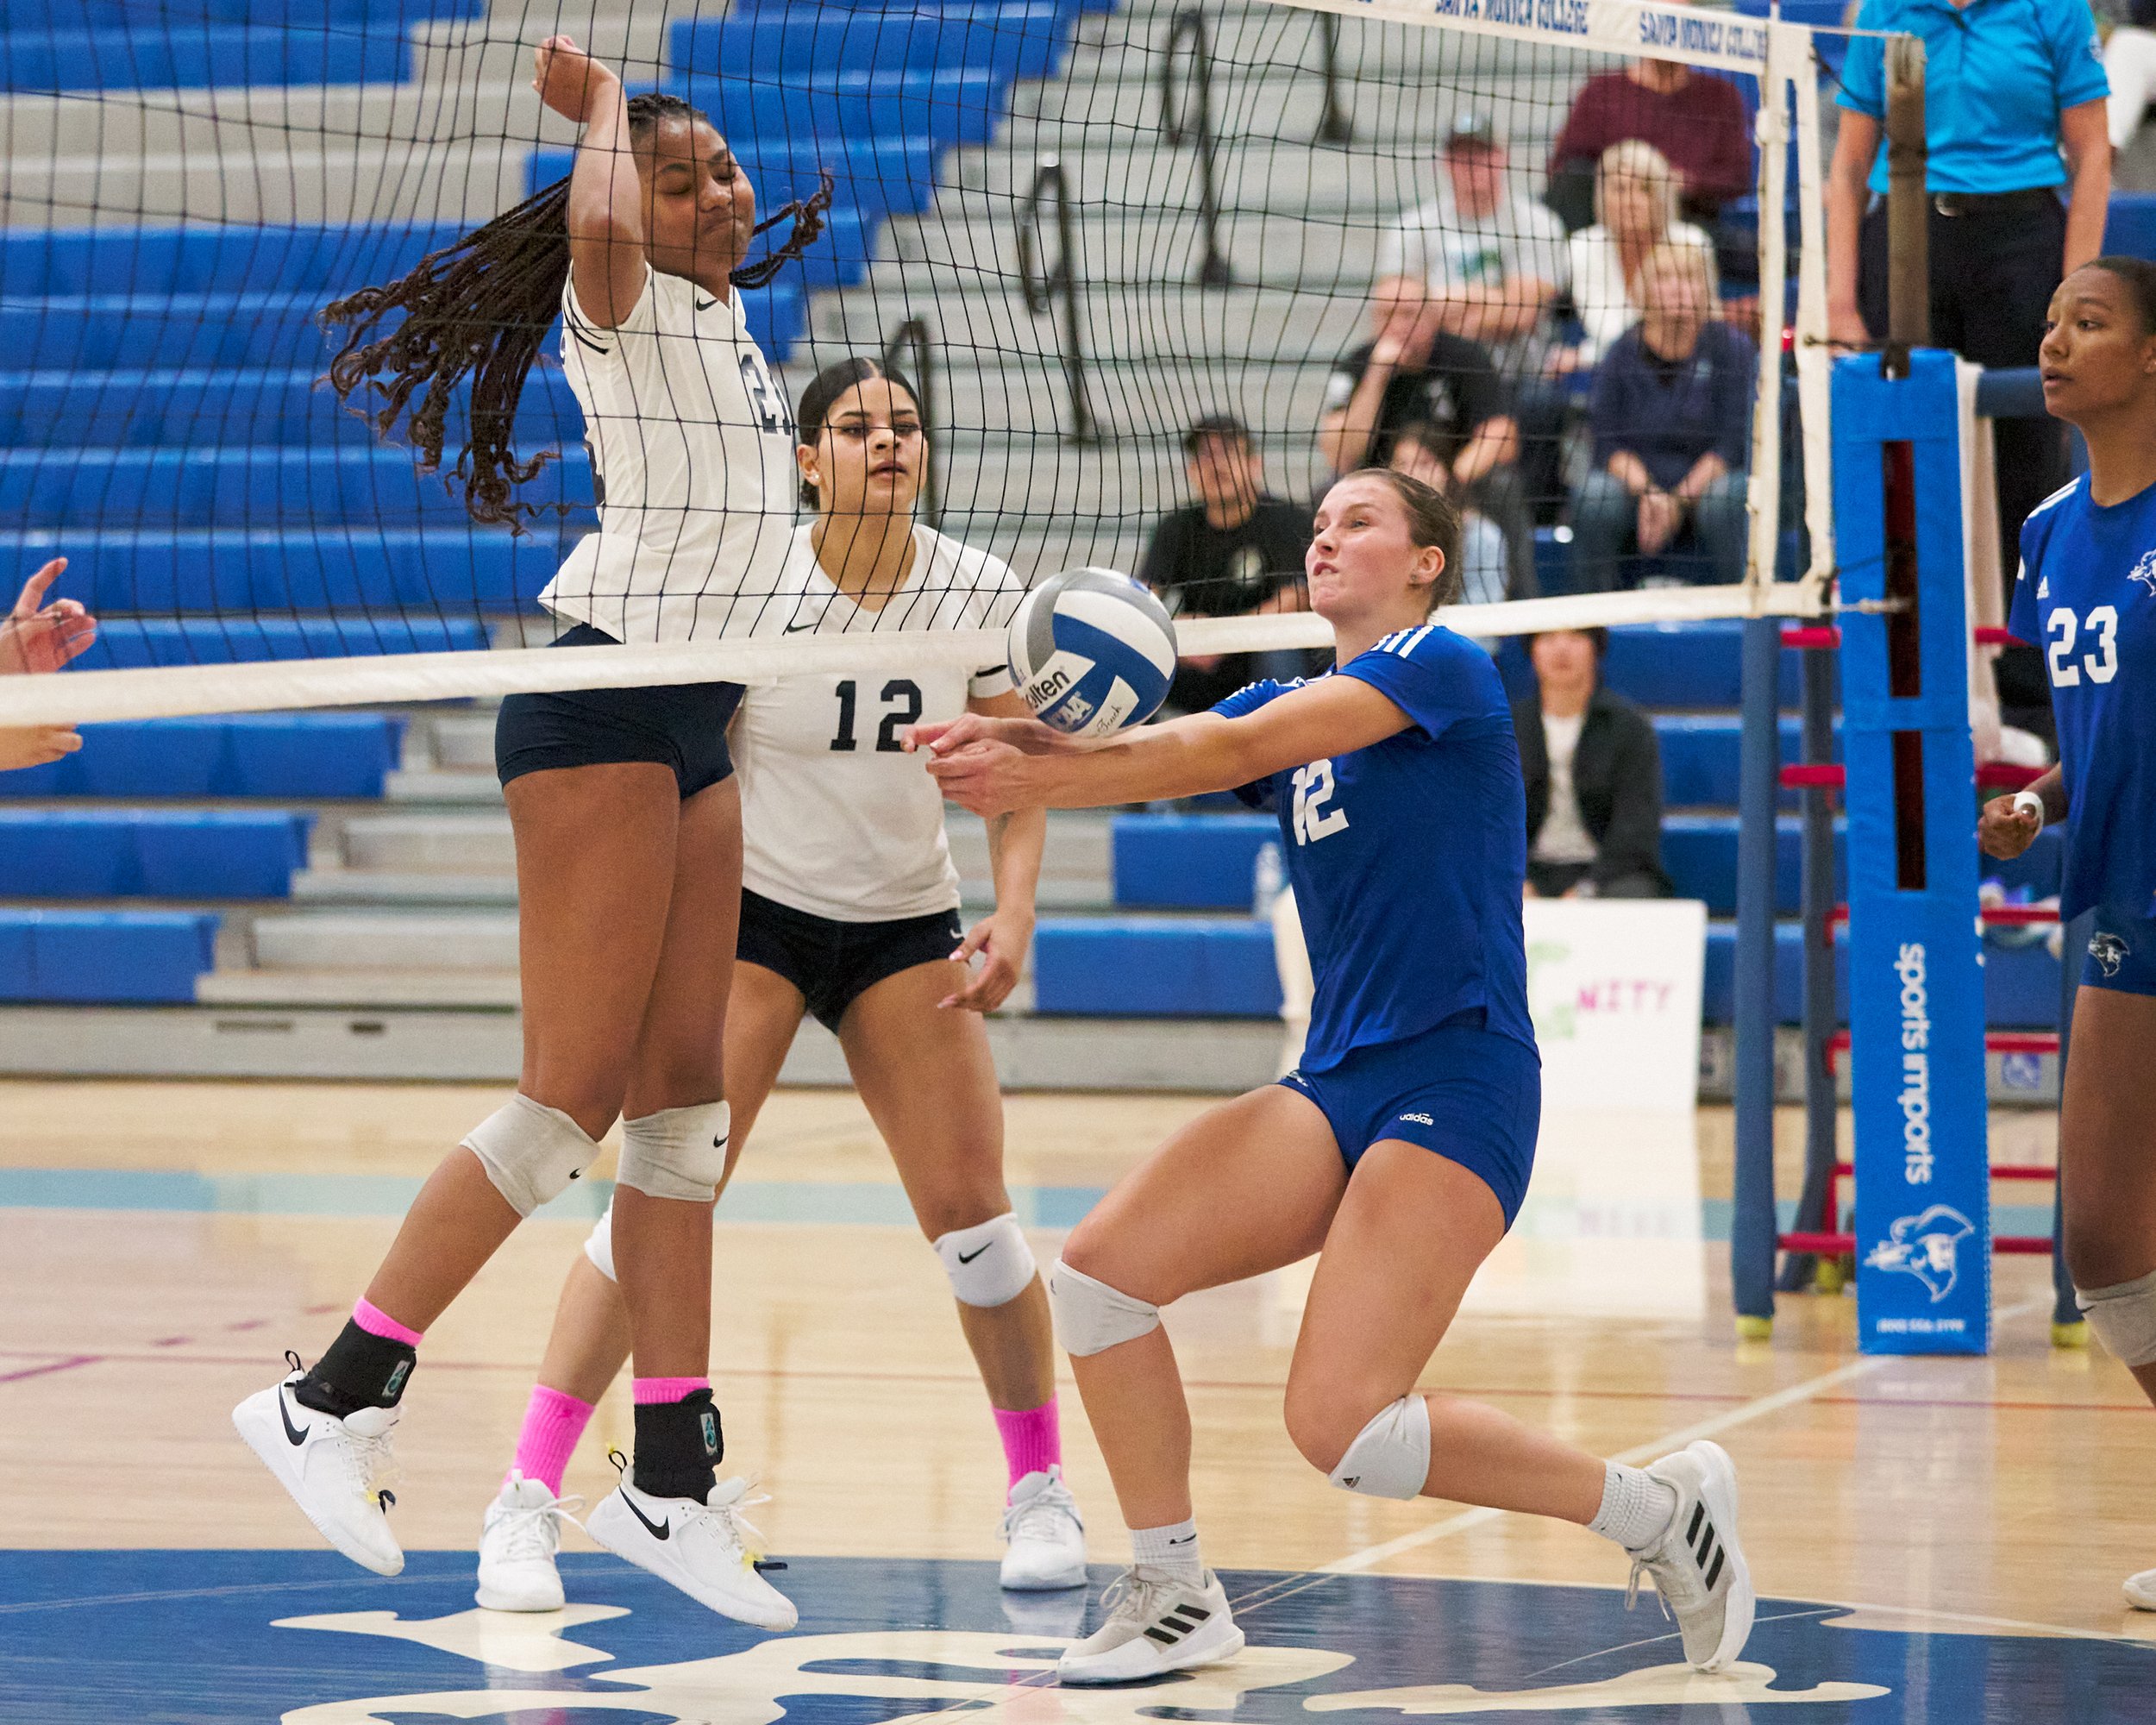  College of the Canyons Cougars' Sahliyah Ravare and Kaelyn White, and Santa Monica College Corsairs' Mia Paulson during the women's volleyball match on Friday, Oct. 28, 2022, at SMC Gym in Santa Monica, Calif. The Corsairs lost 1-3. (Nicholas McCall